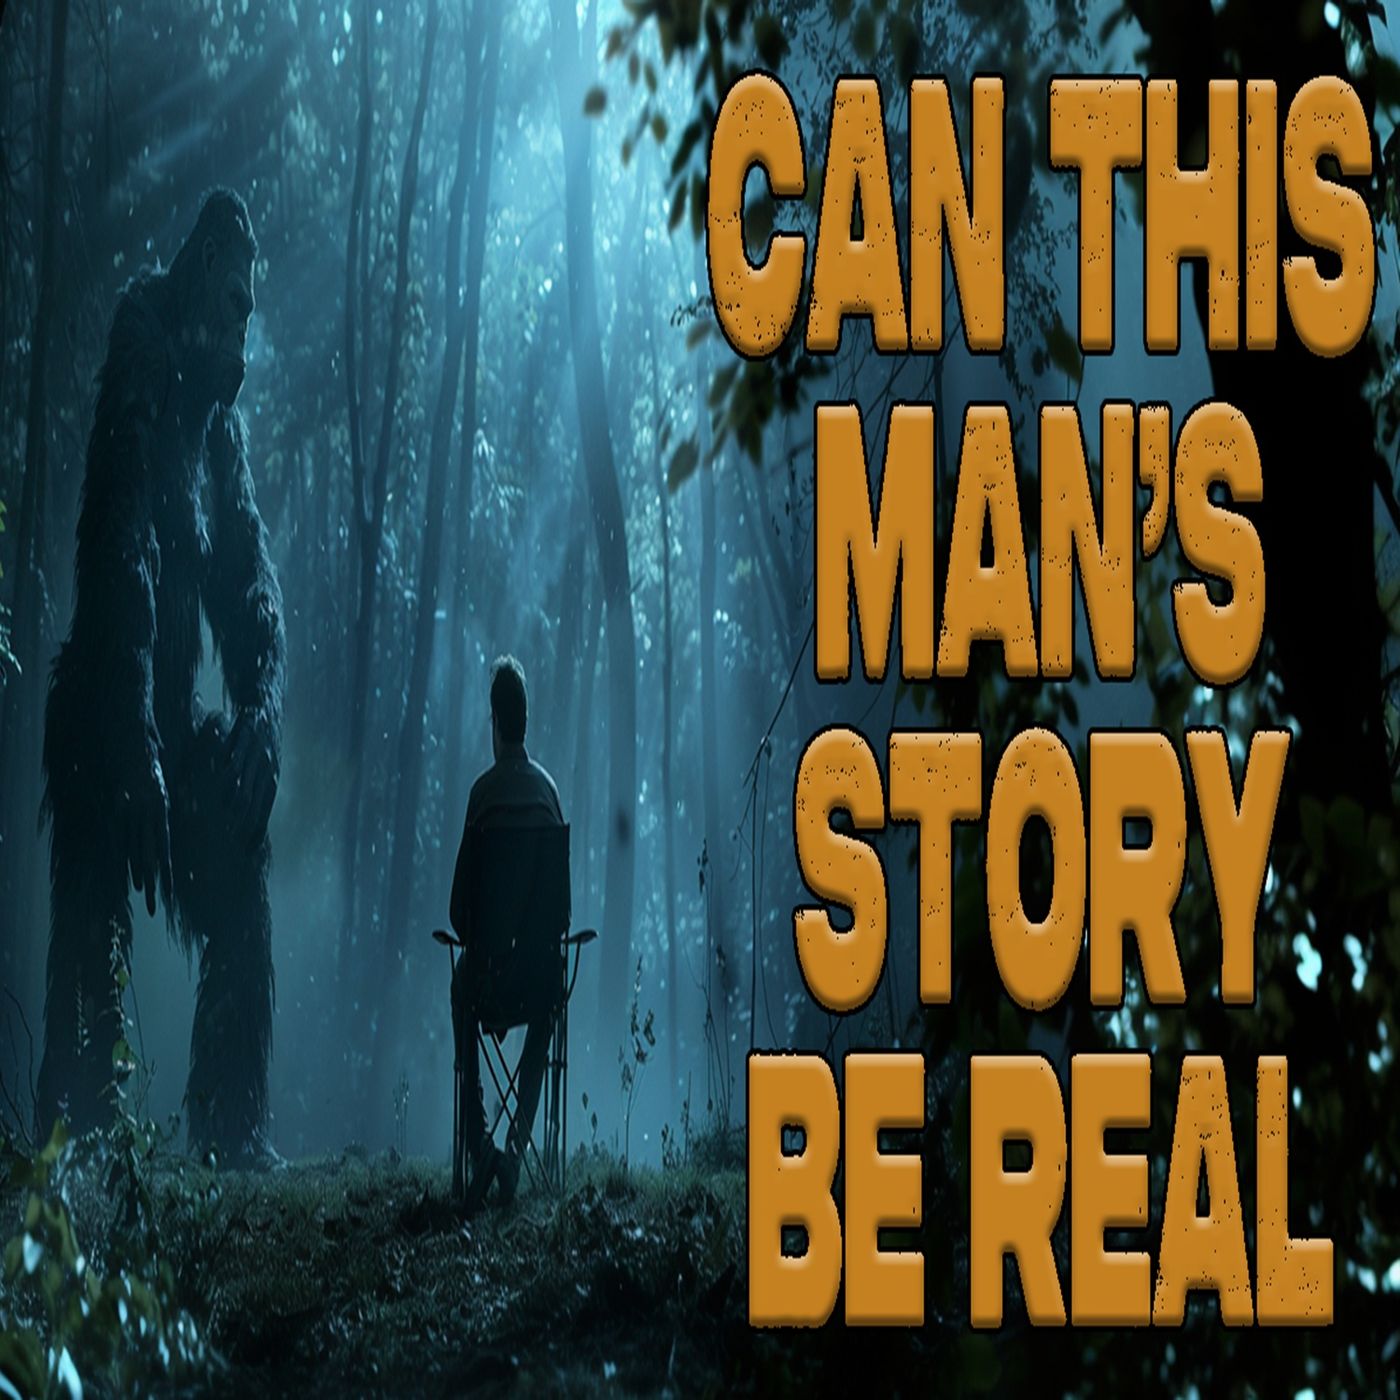 Can This Story About BIGFOOT be True?